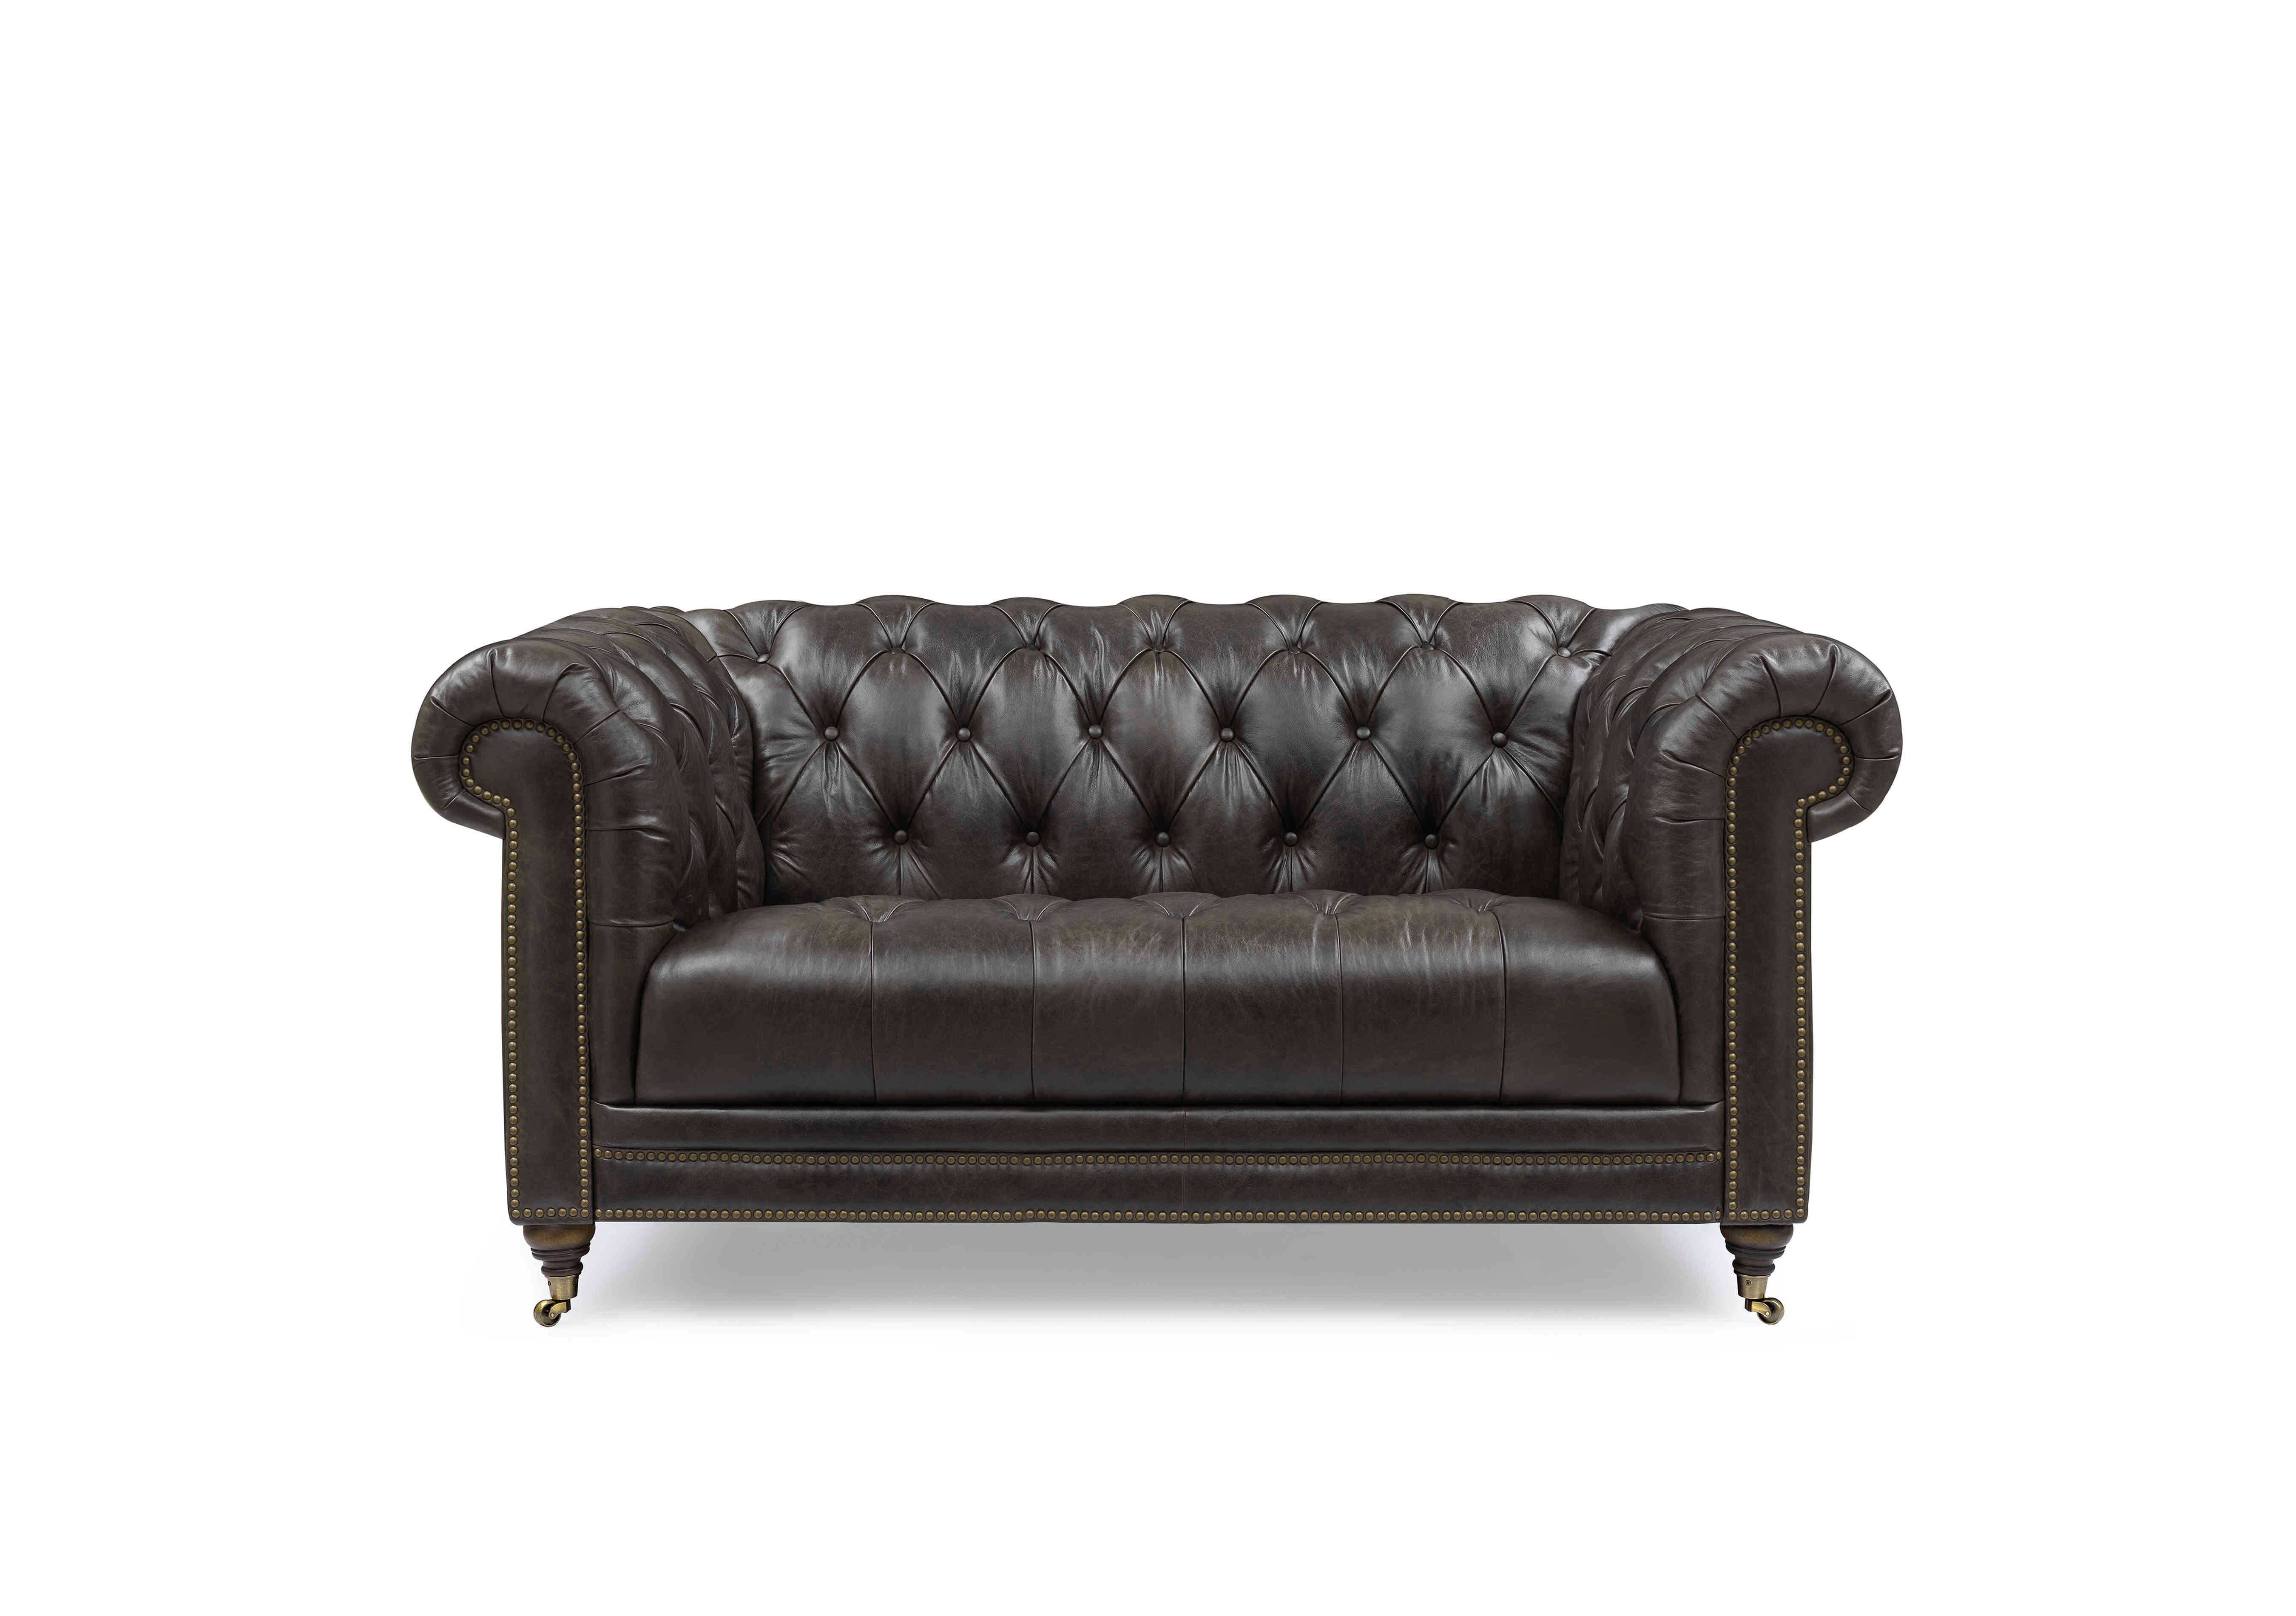 Walter 2 Seater Leather Chesterfield Sofa in X3y1-1759ls Cannon on Furniture Village